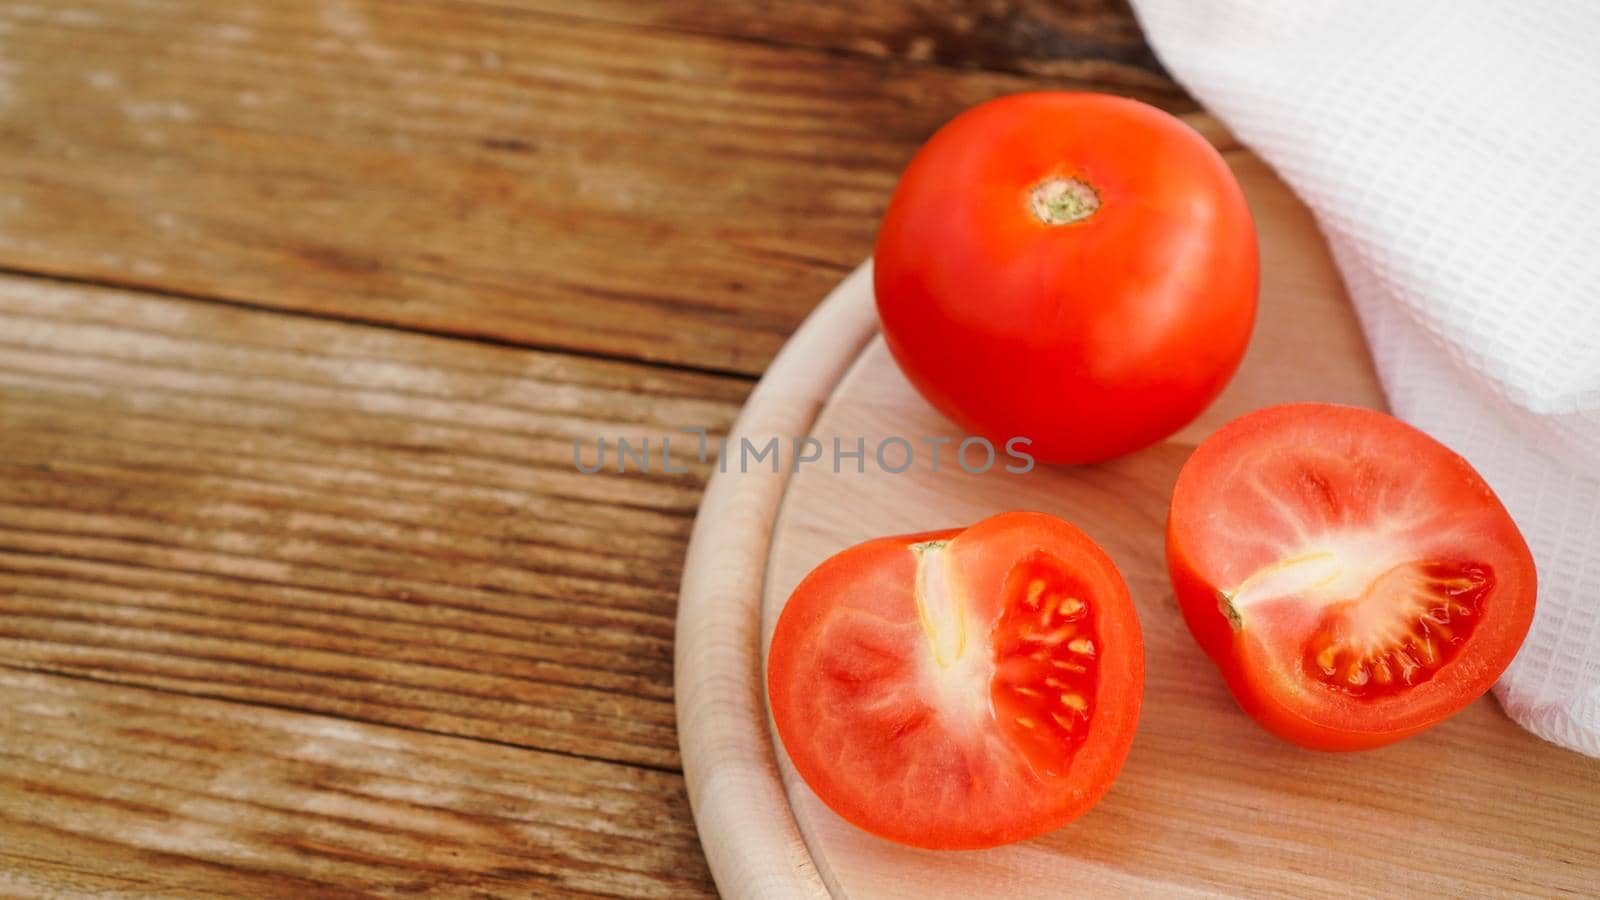 Whole and cut tomato on a wooden board for slicing. Rustic style and wood by natali_brill